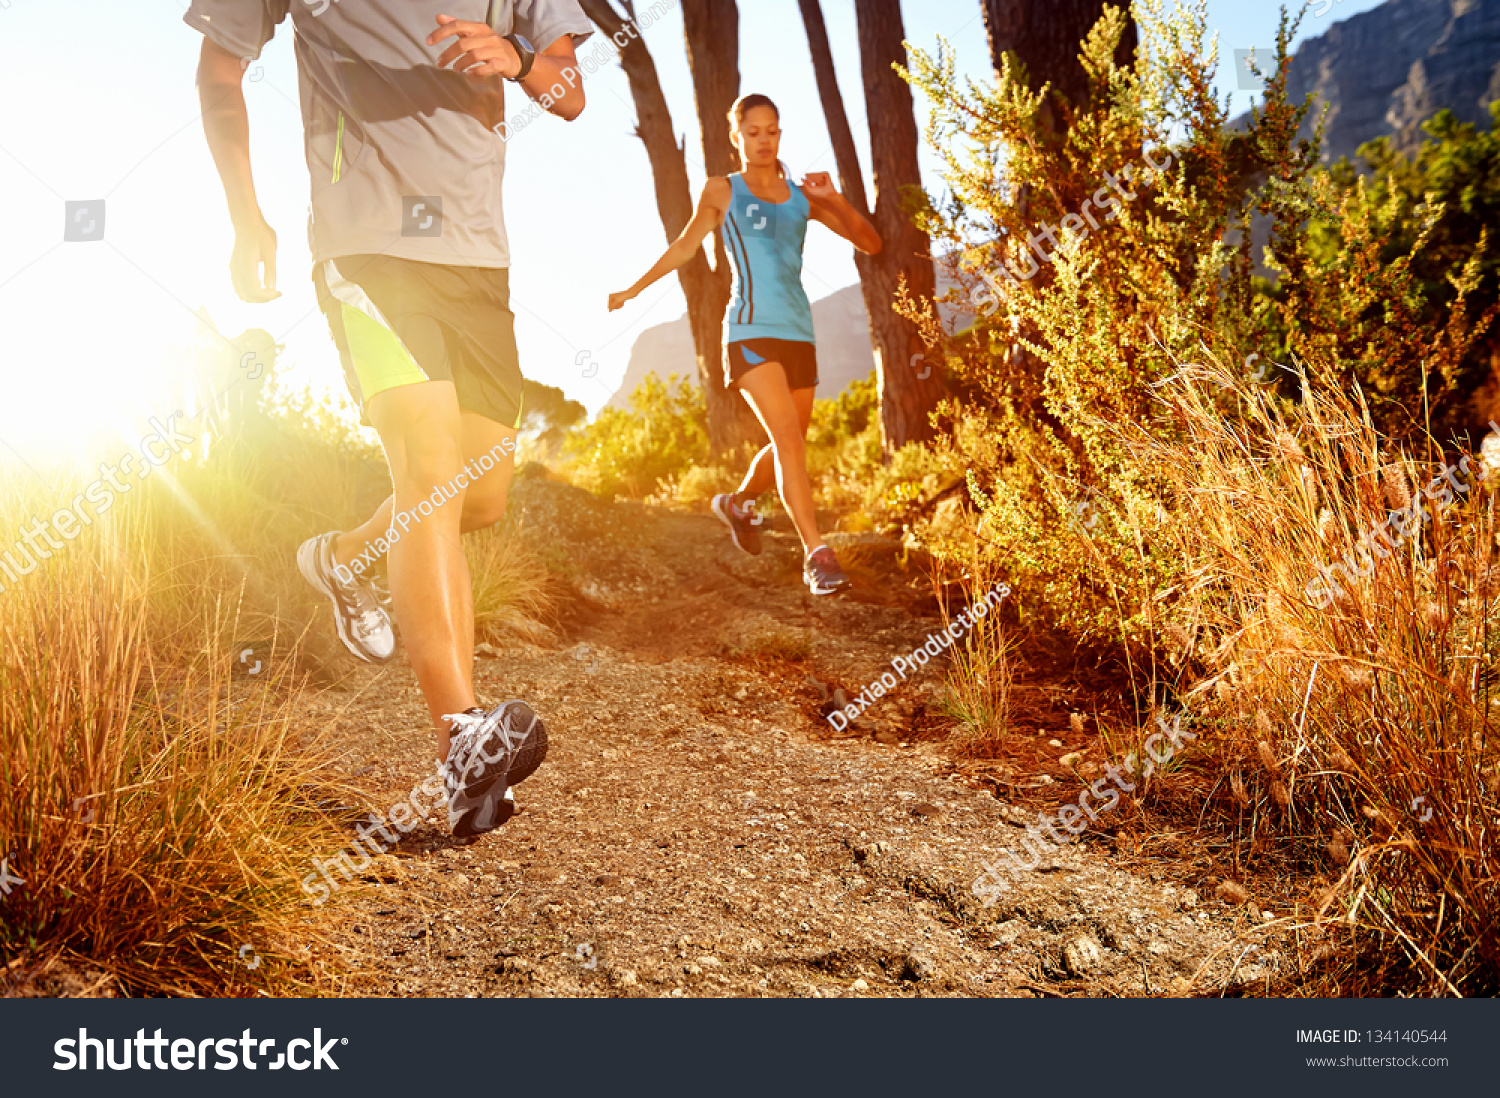 Trail running marathon athlete outdoors sunrise couple training for fitness and healthy lifestyle #134140544